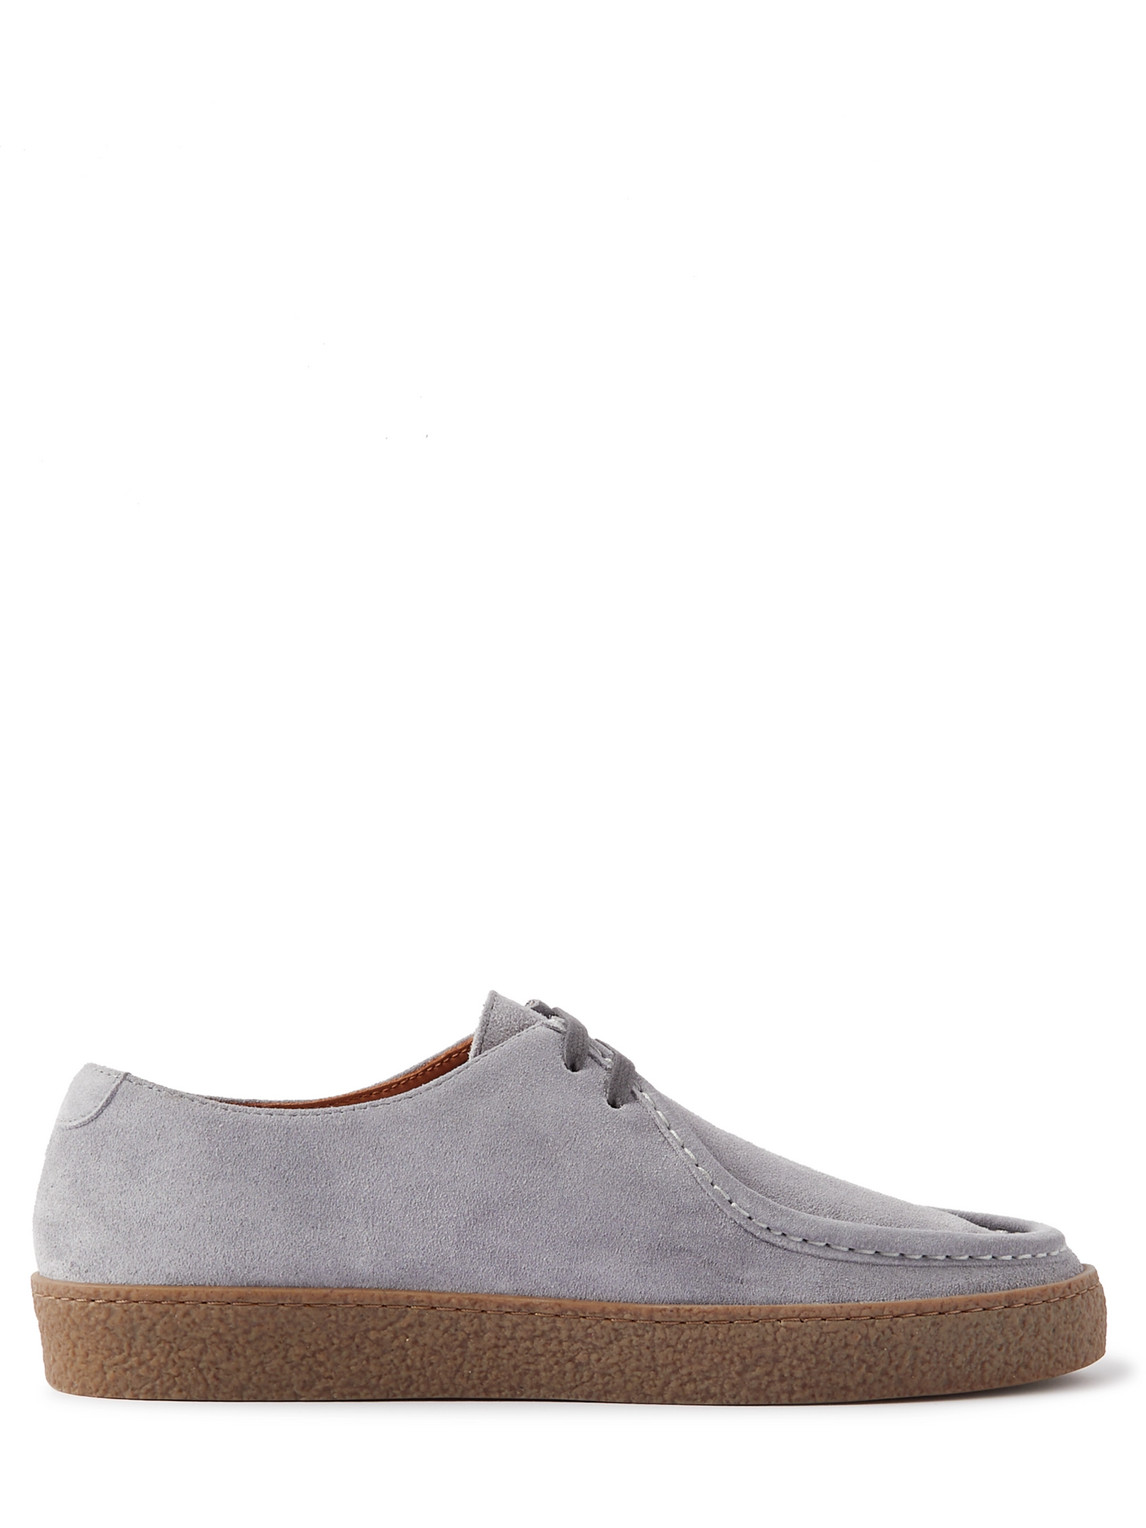 Mr P Larry Regenerated Suede By Evolo® Derby Shoes In Blue